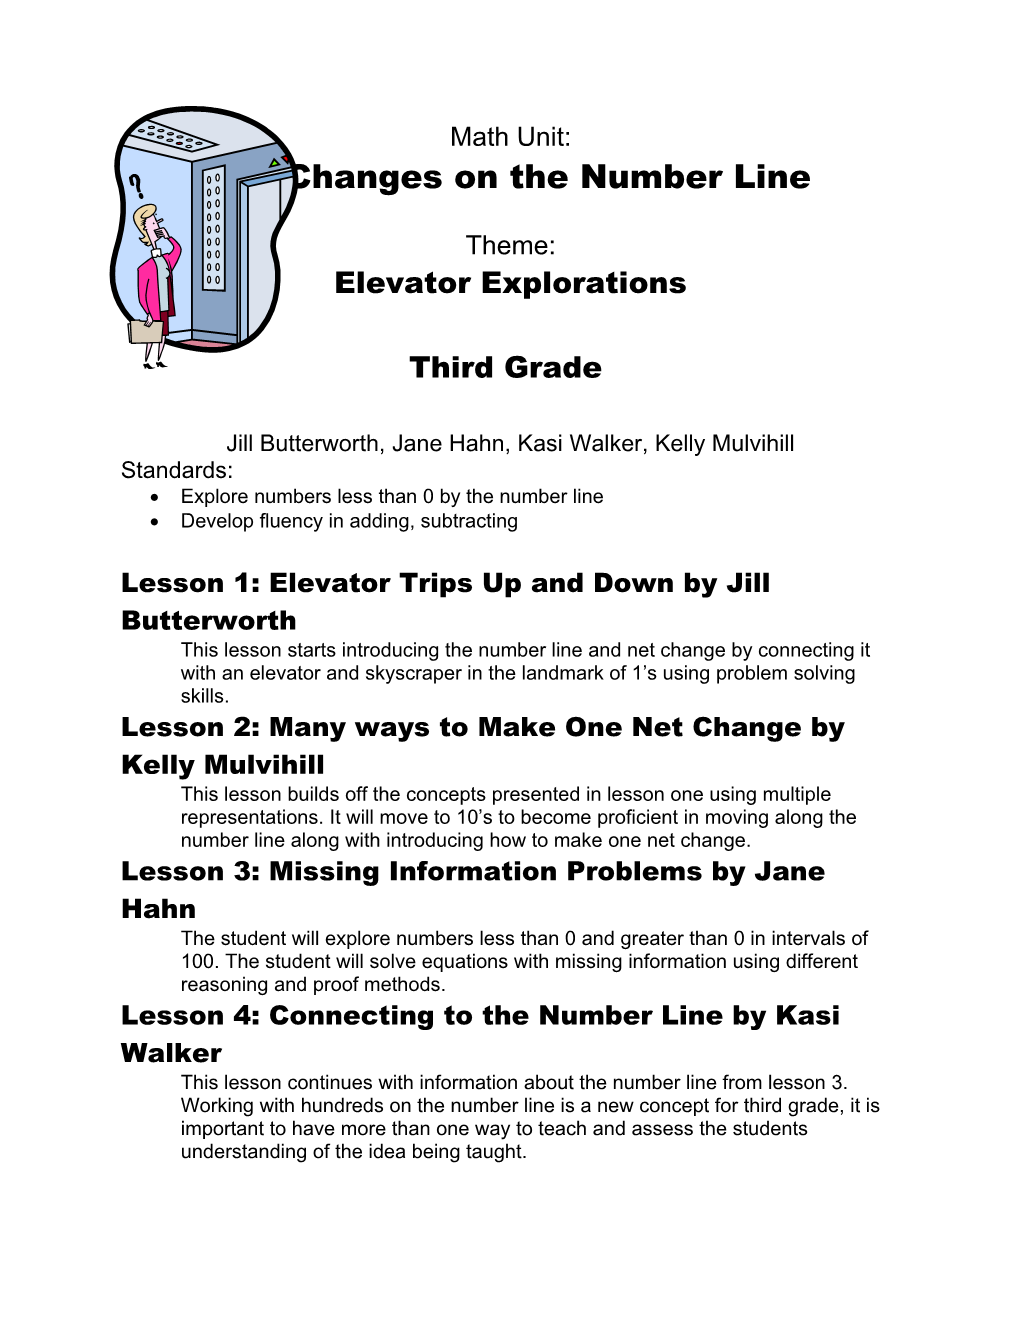 Net Changes on the Number Line